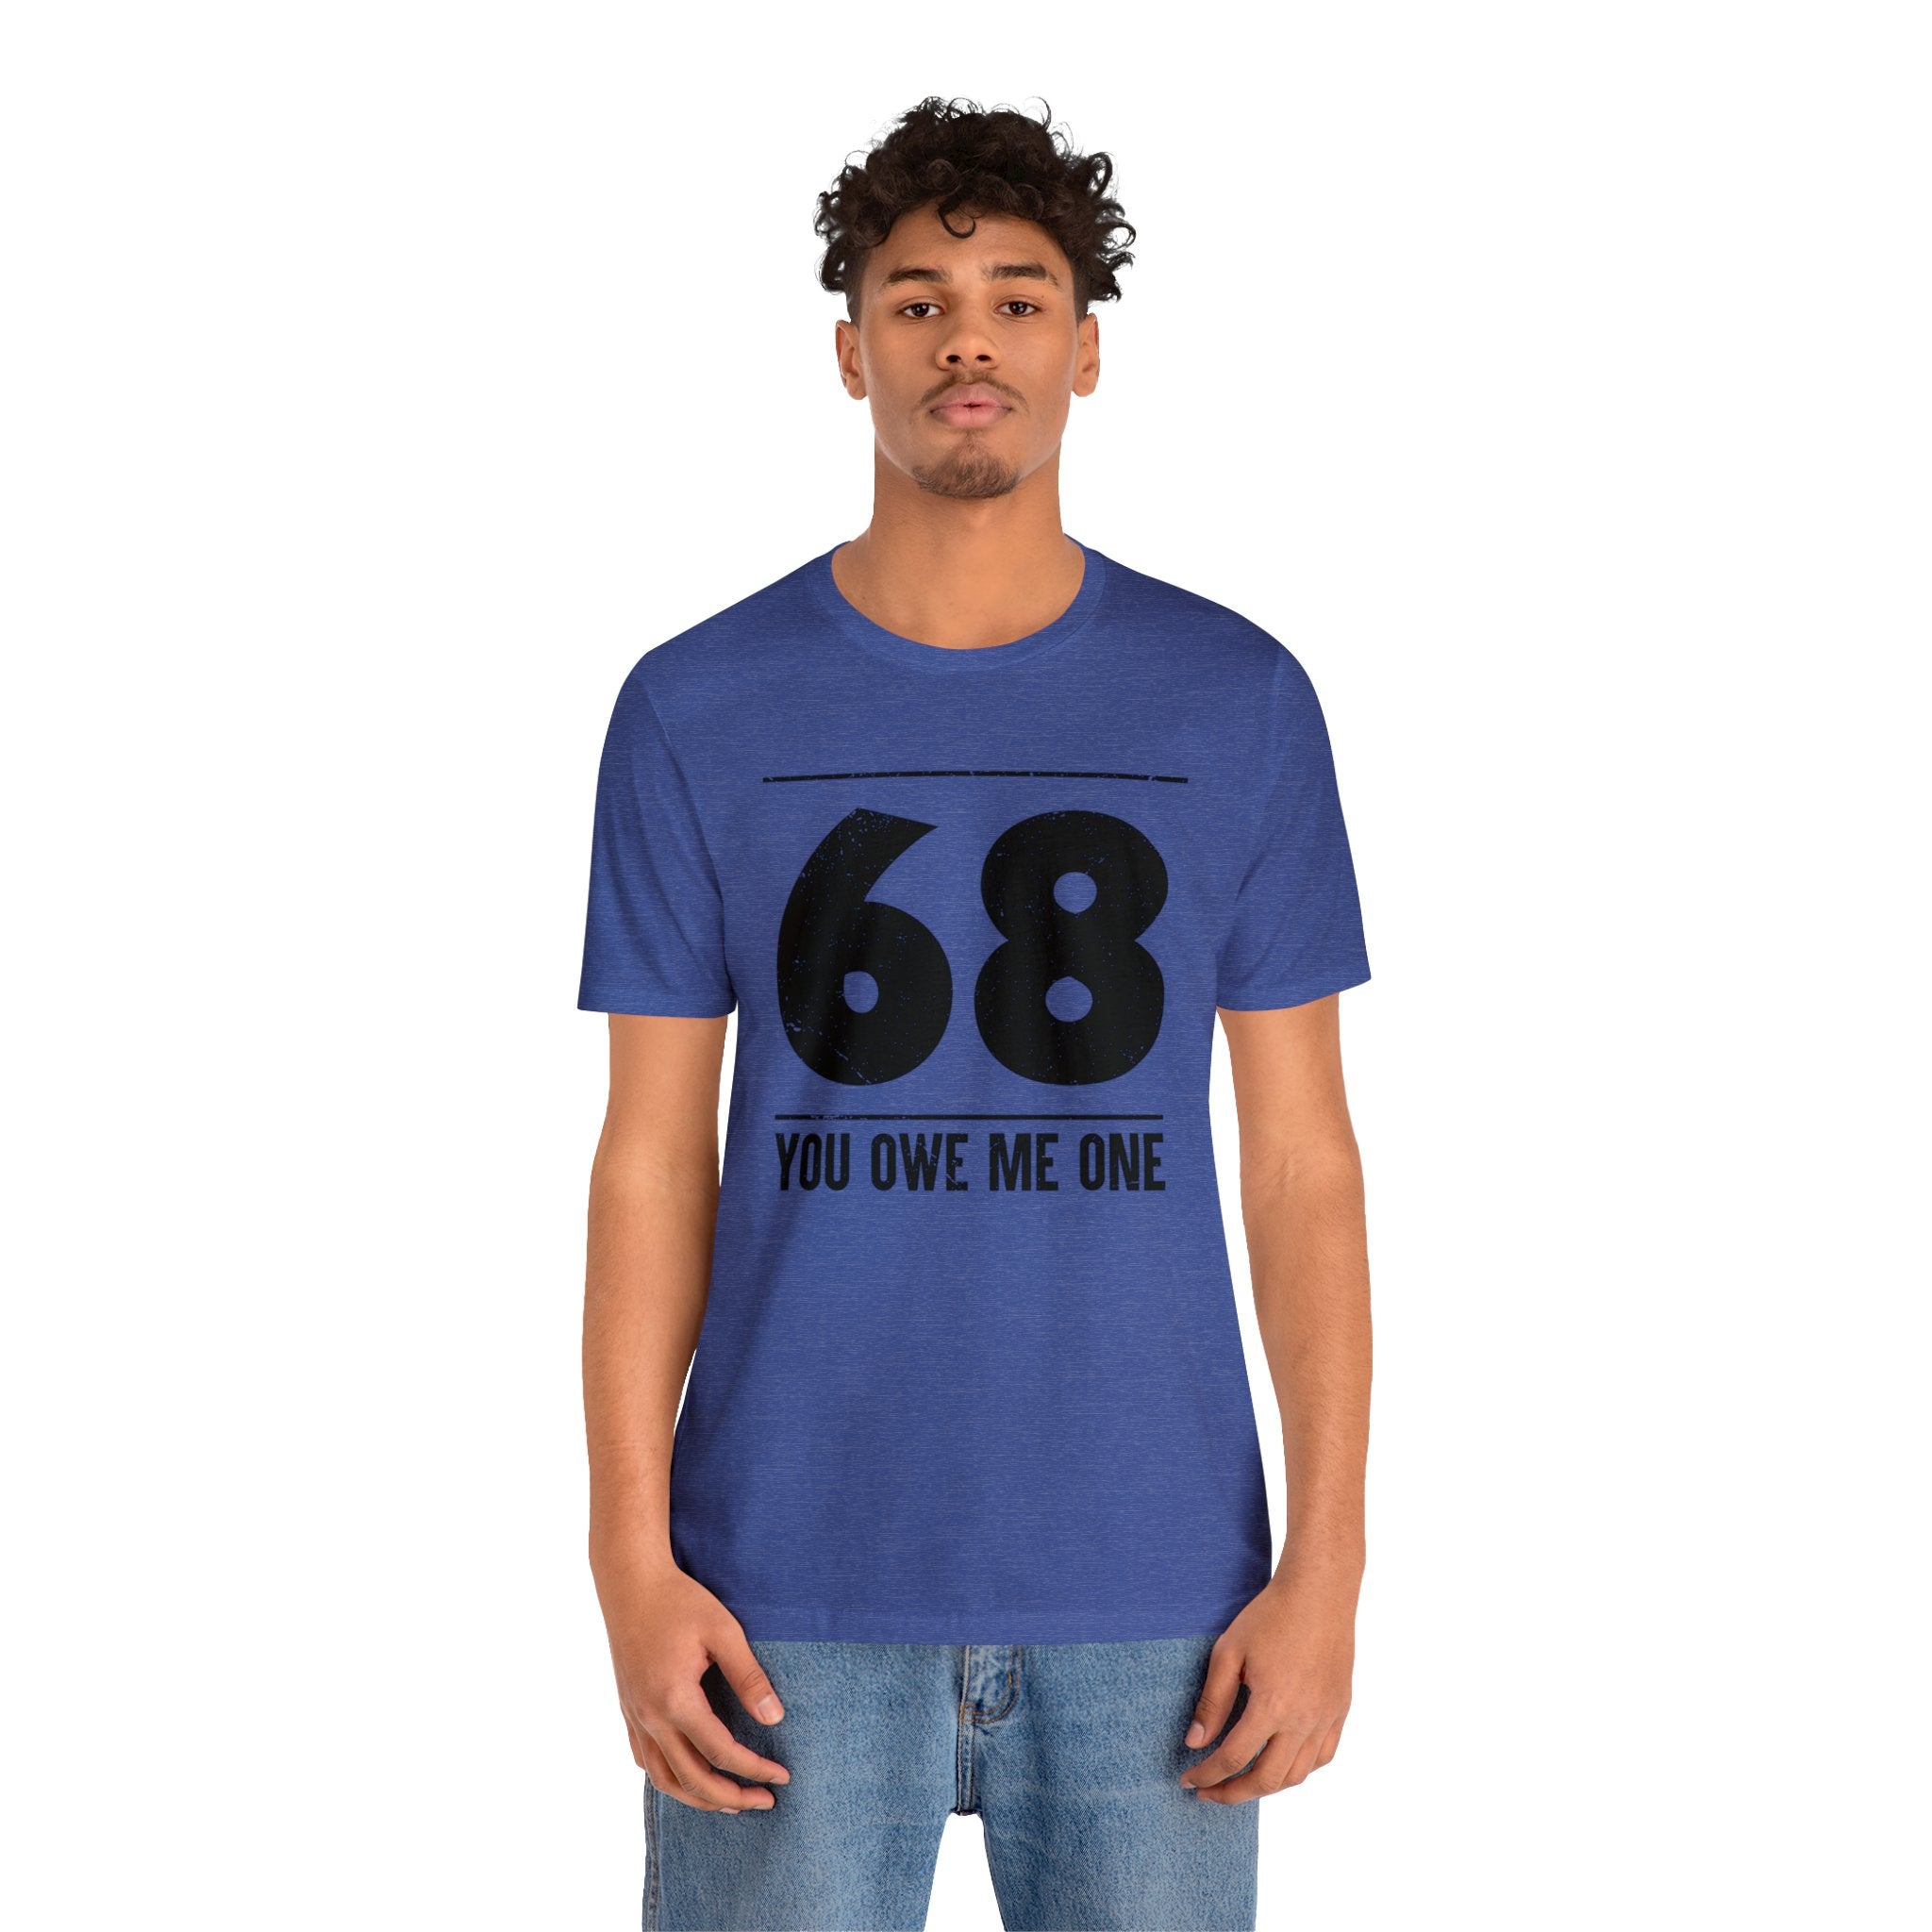 A man wearing a geeky t-shirt that says "68 You Owe Me One.